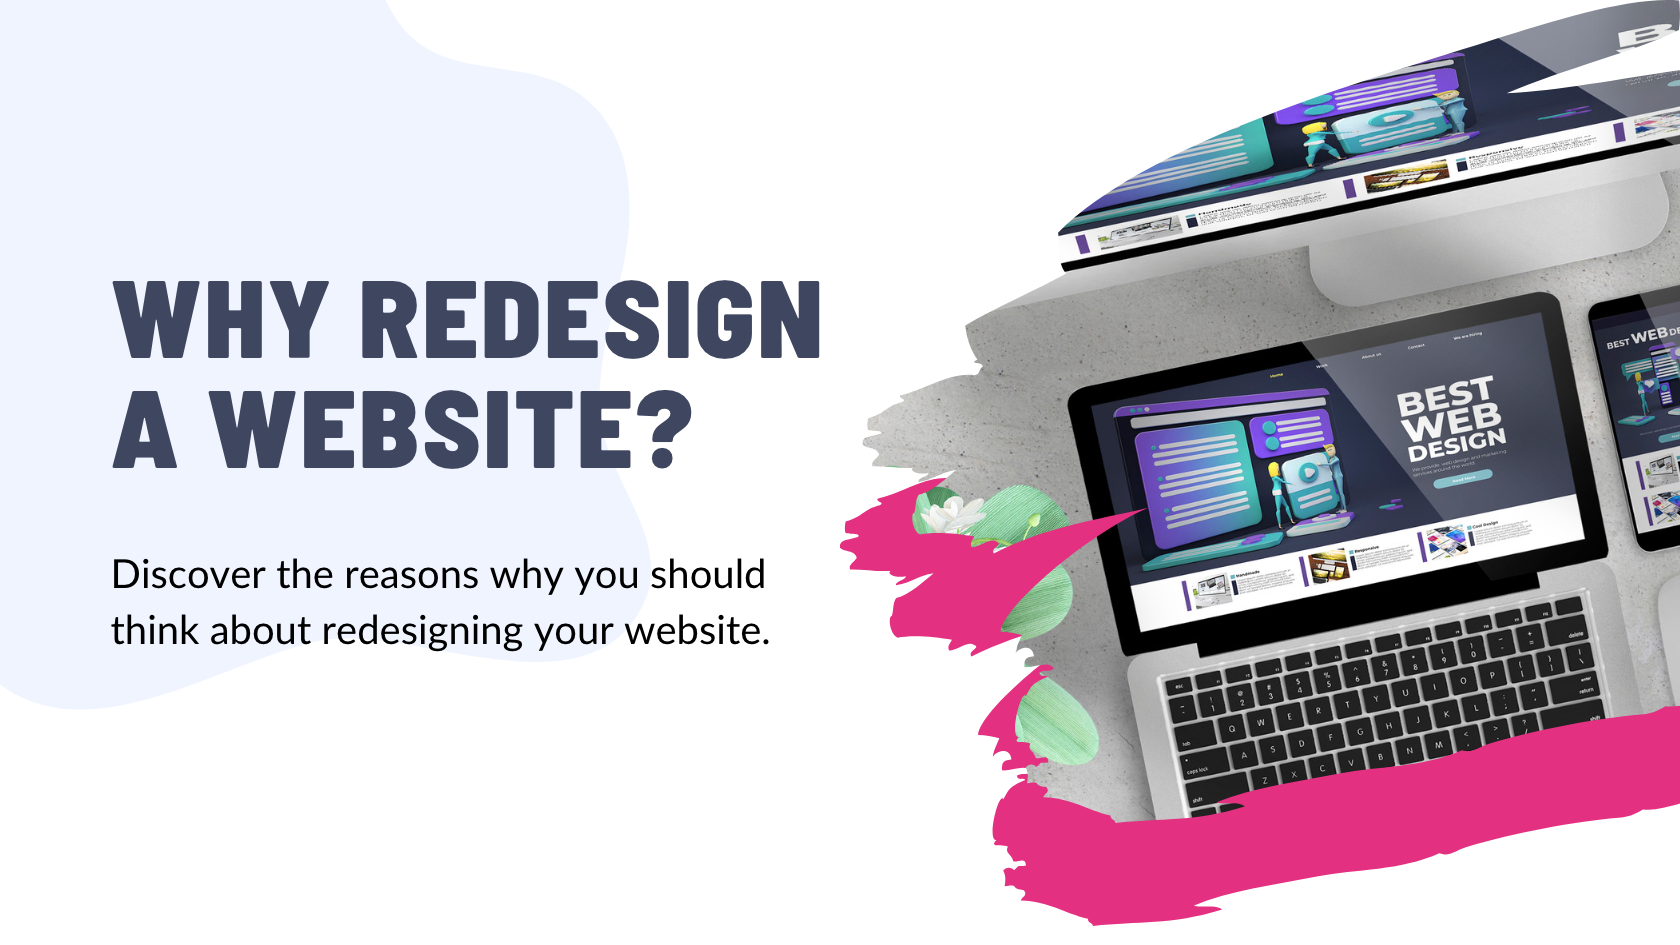 Why Redesign a Website?